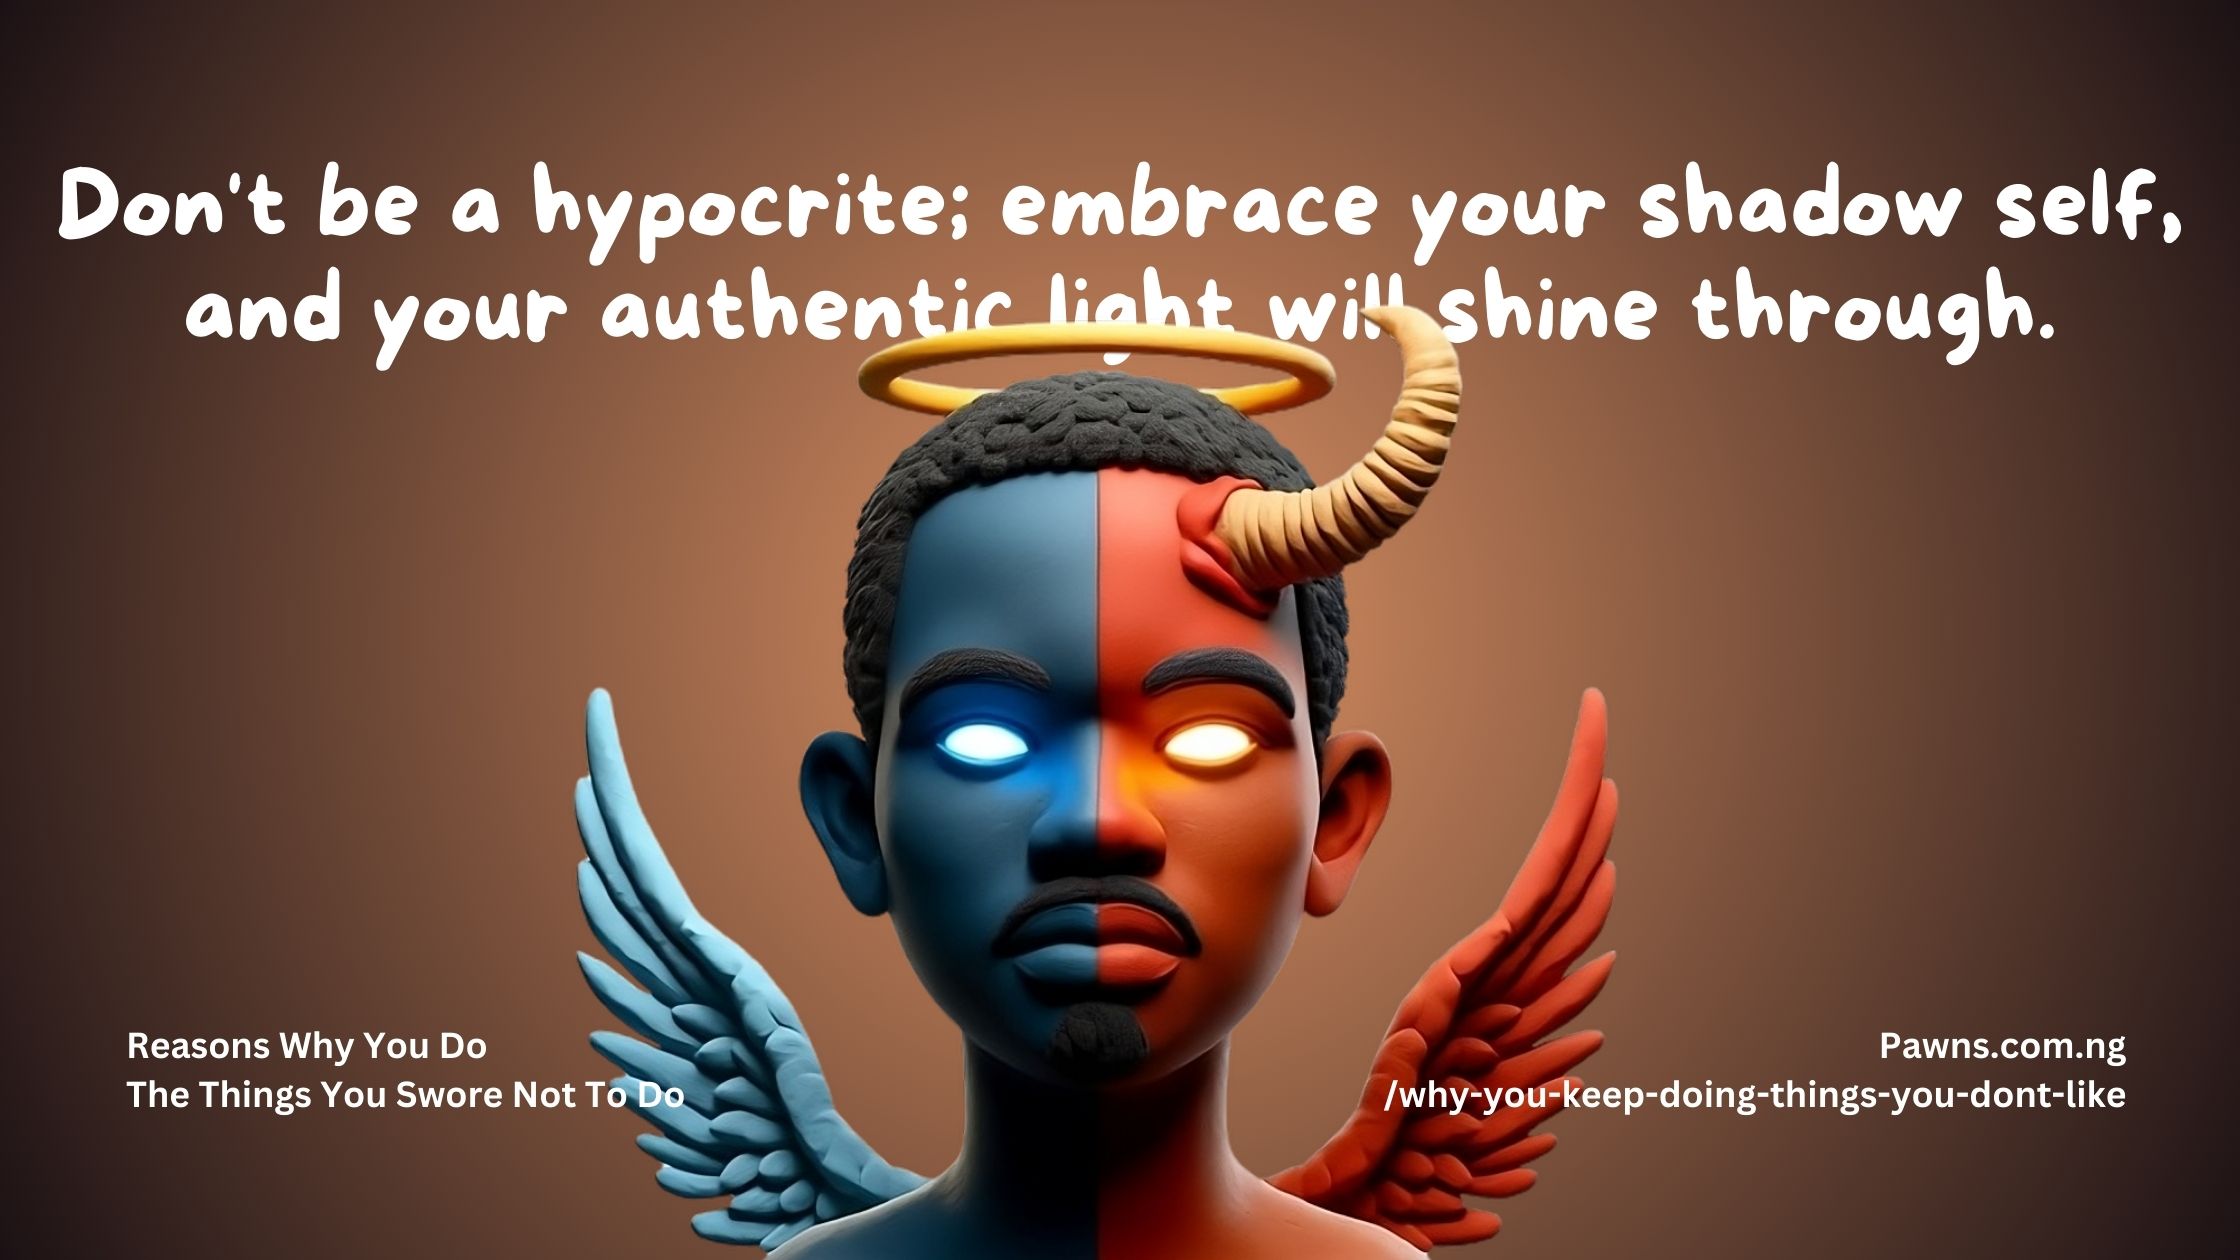 Don't be a hypocrite; embrace your shadow self, and your authentic light will shine through. Reasons Why You Do The Things You Swore Not To Do